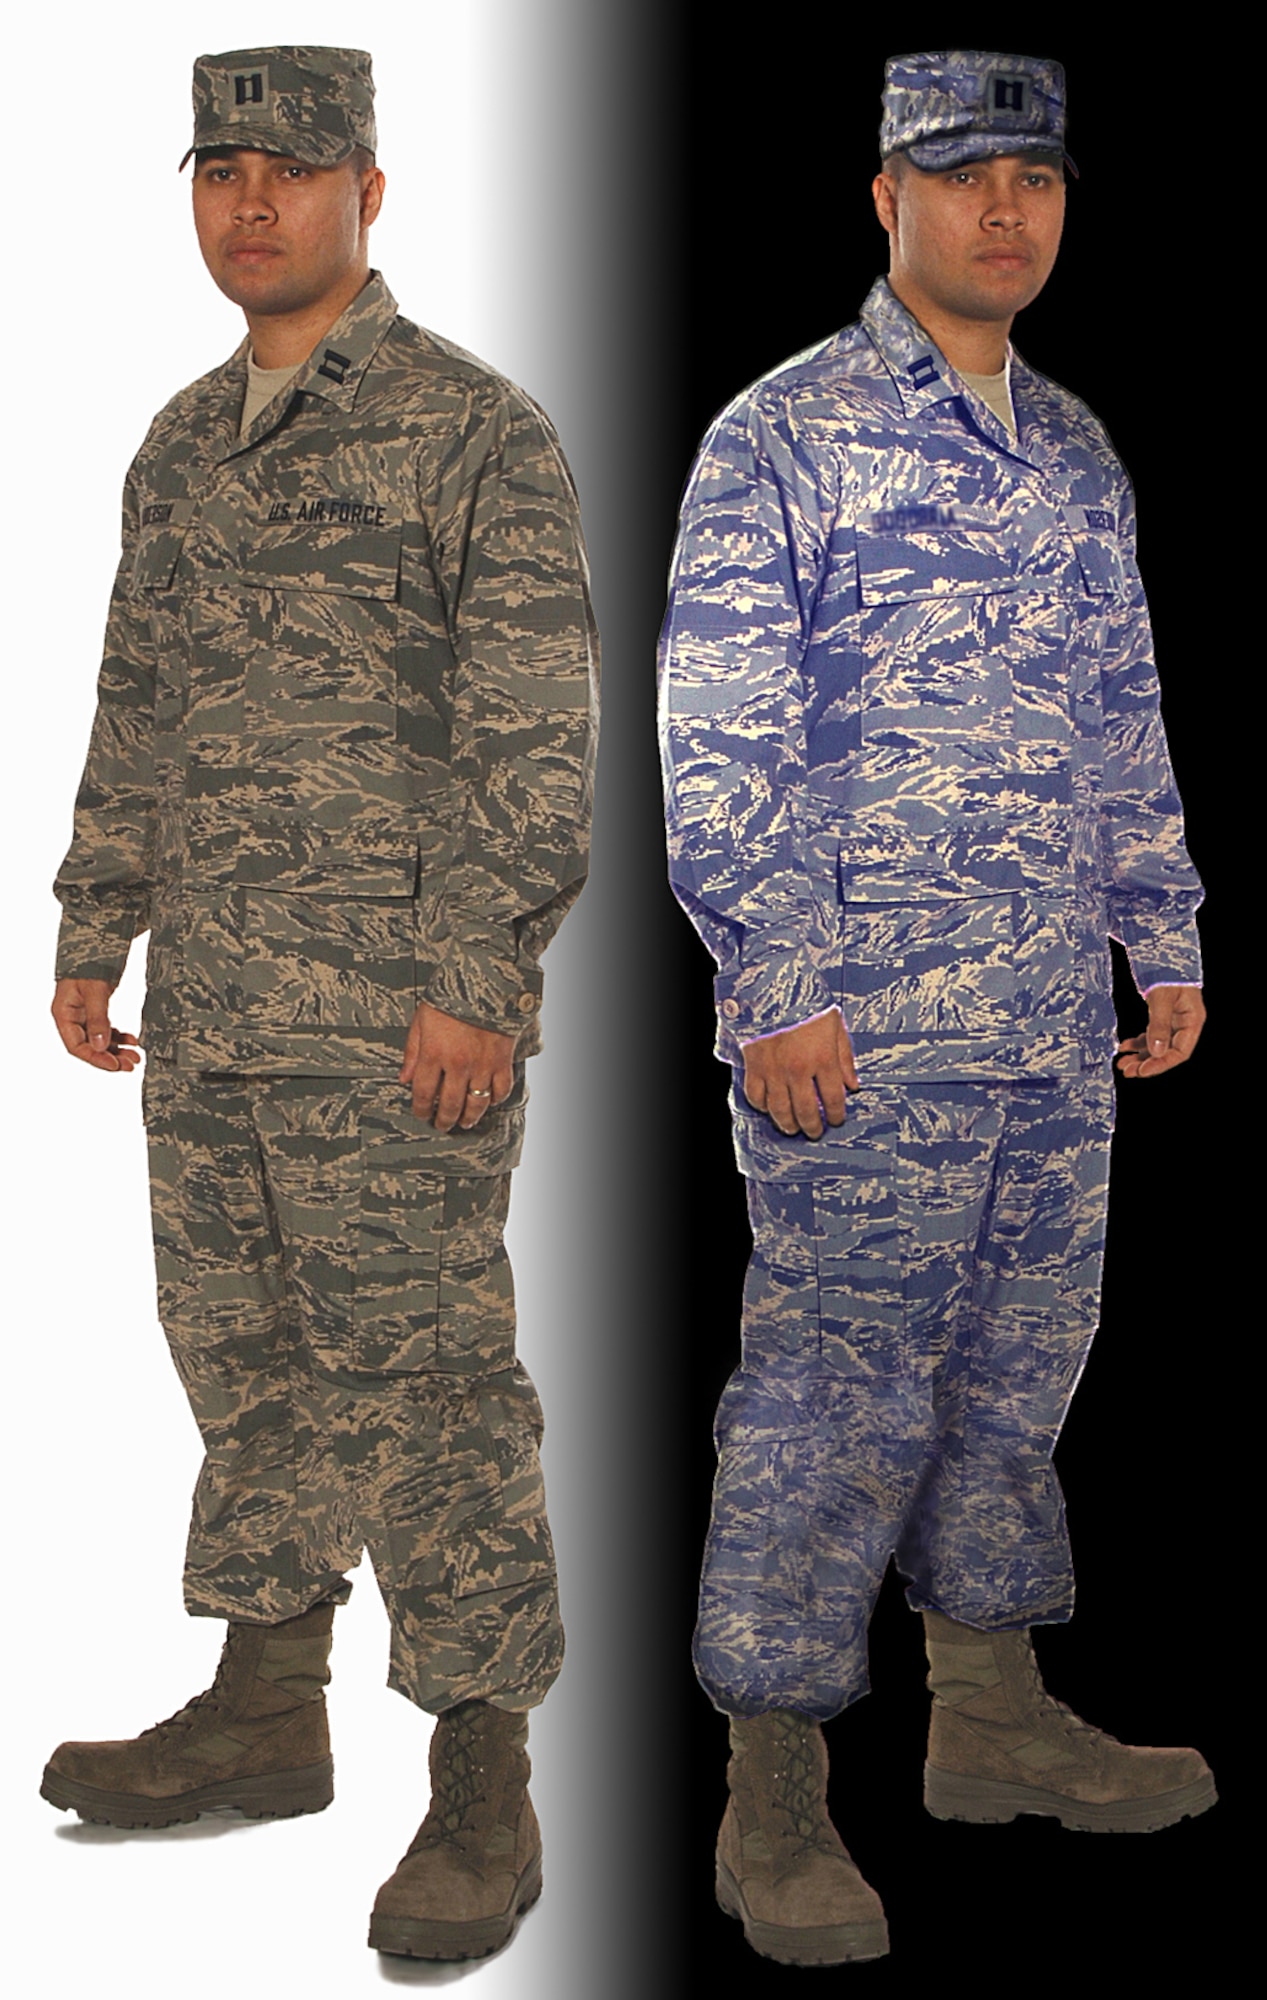 Which uniform would you want to wear into battle? Optical brighteners in many laundry detergents make the Airman battle Uniform more detectable by night vision equipment. At far right, the photo illustration demonstrates how a uniform washed in laundry detergent with optical brightener additives would look under an ultraviolet light, while the left side shows how it looks when washed without the optical brighteners. (photo by Senior Airman Stephen Cadette)